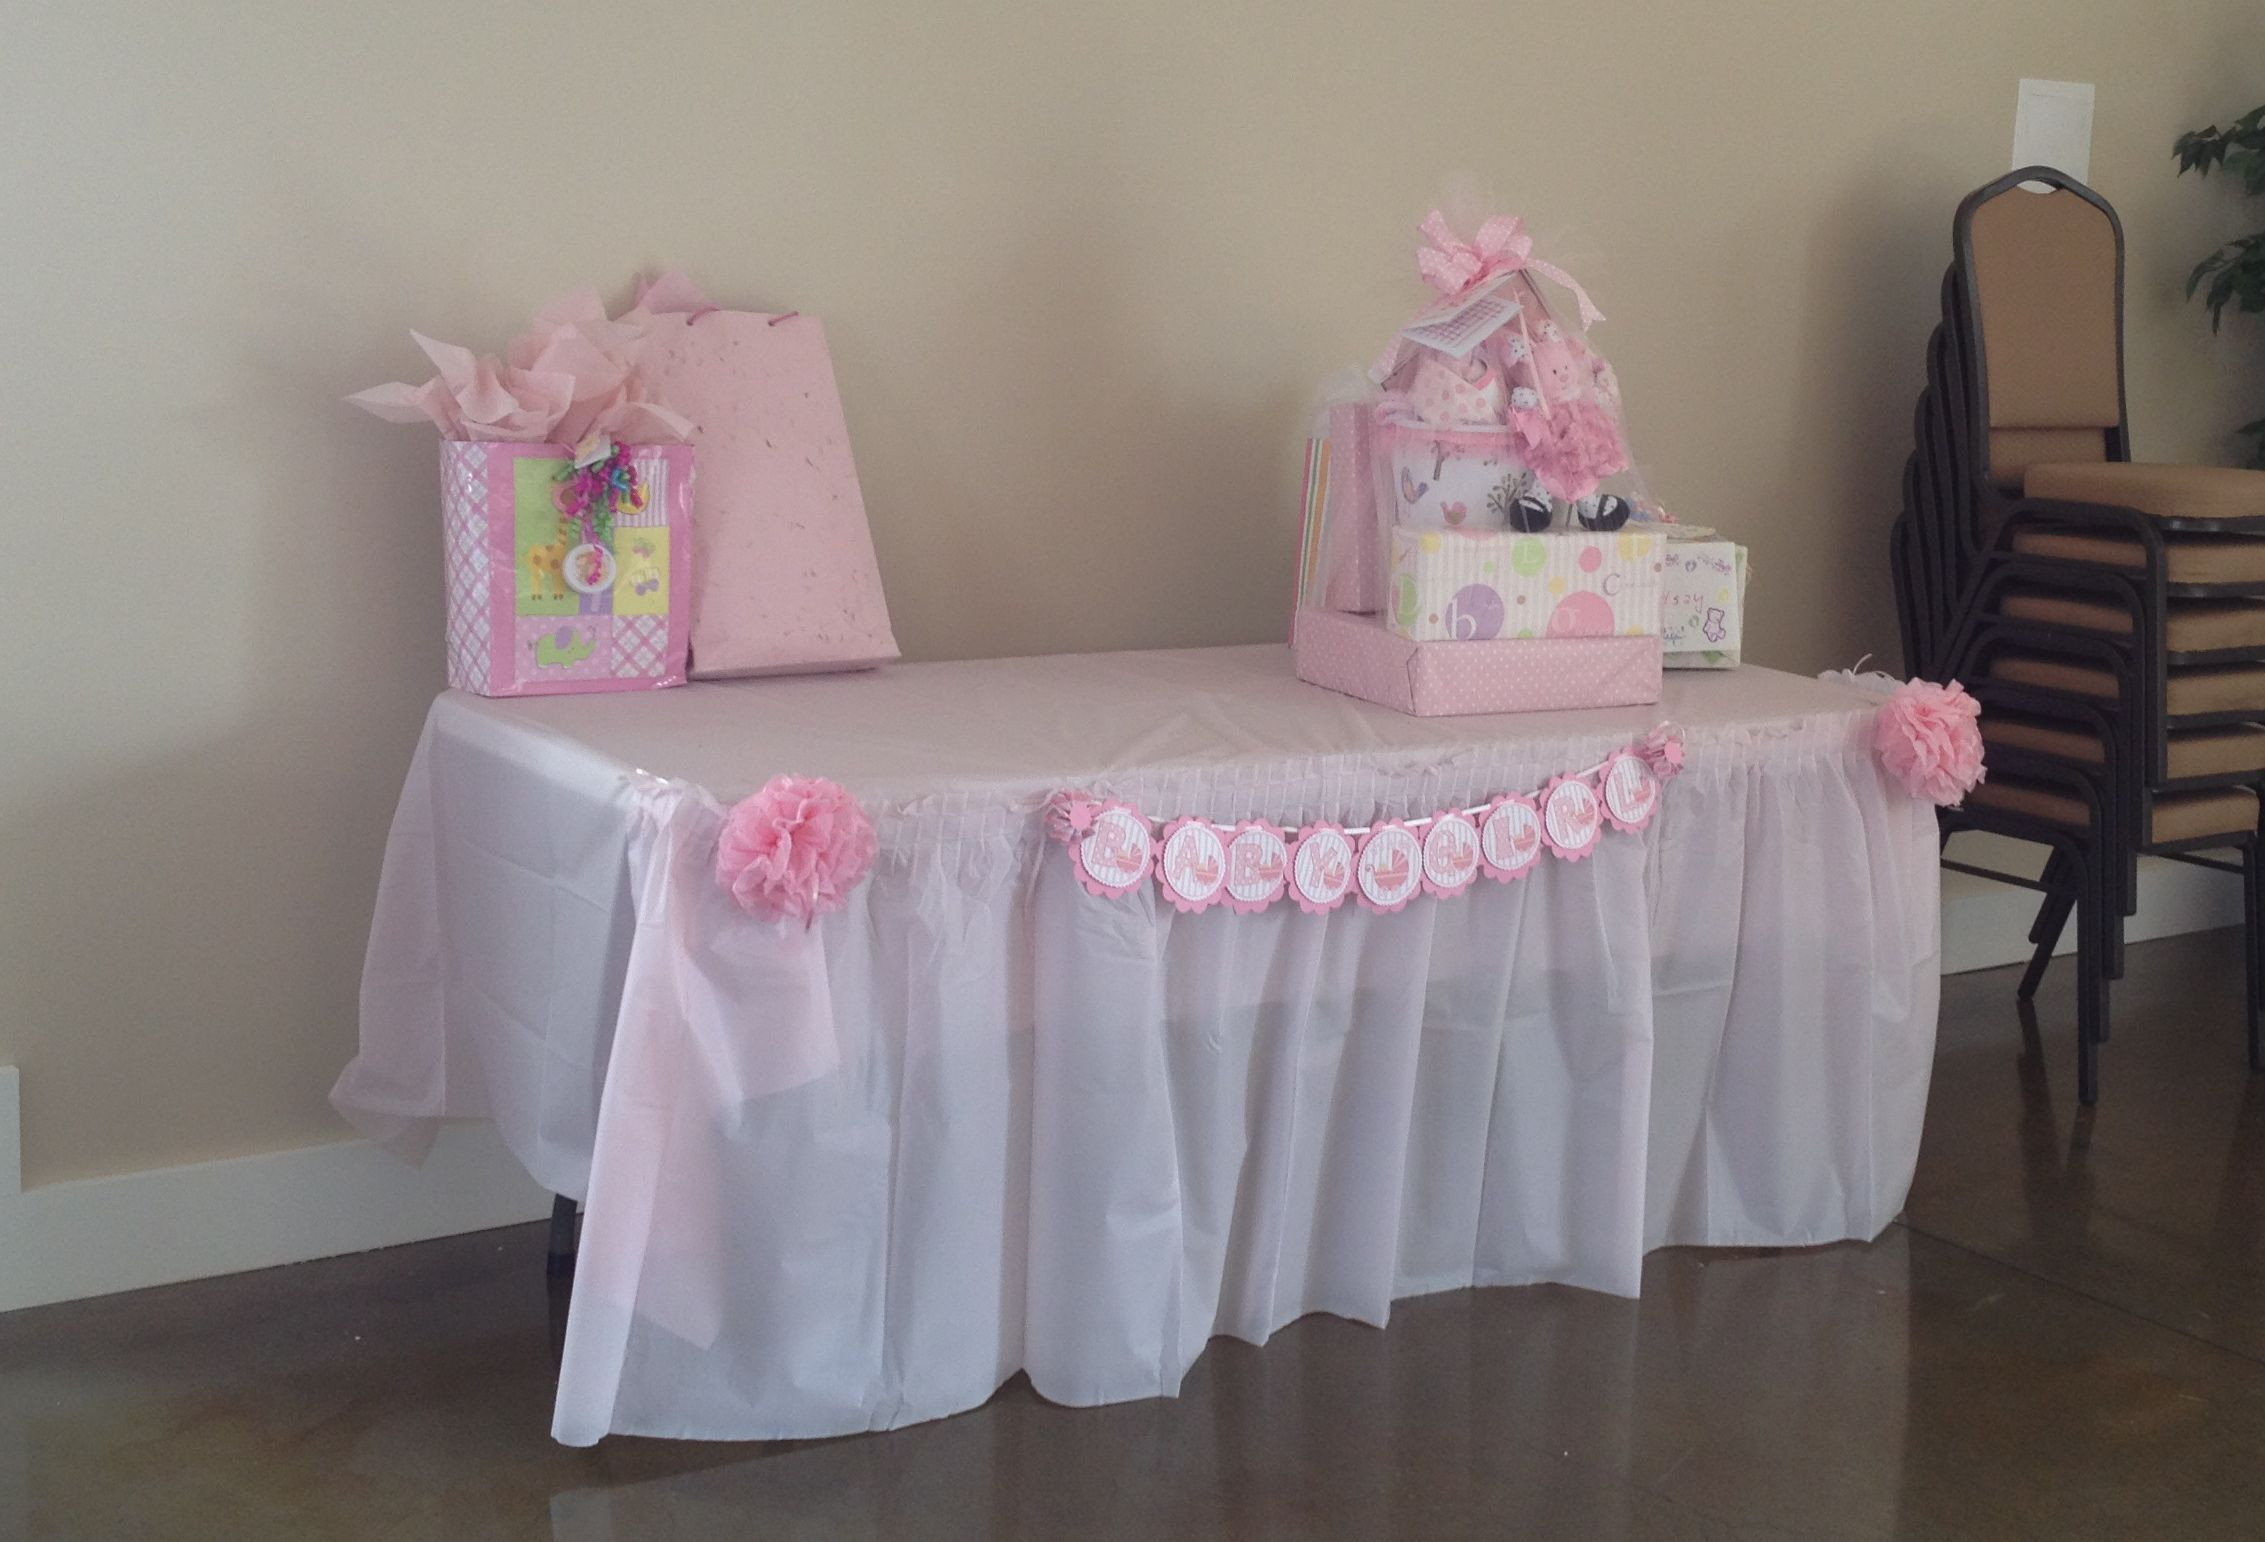 Gift Table Baby Shower Ideas
 BABY SHOWER t table